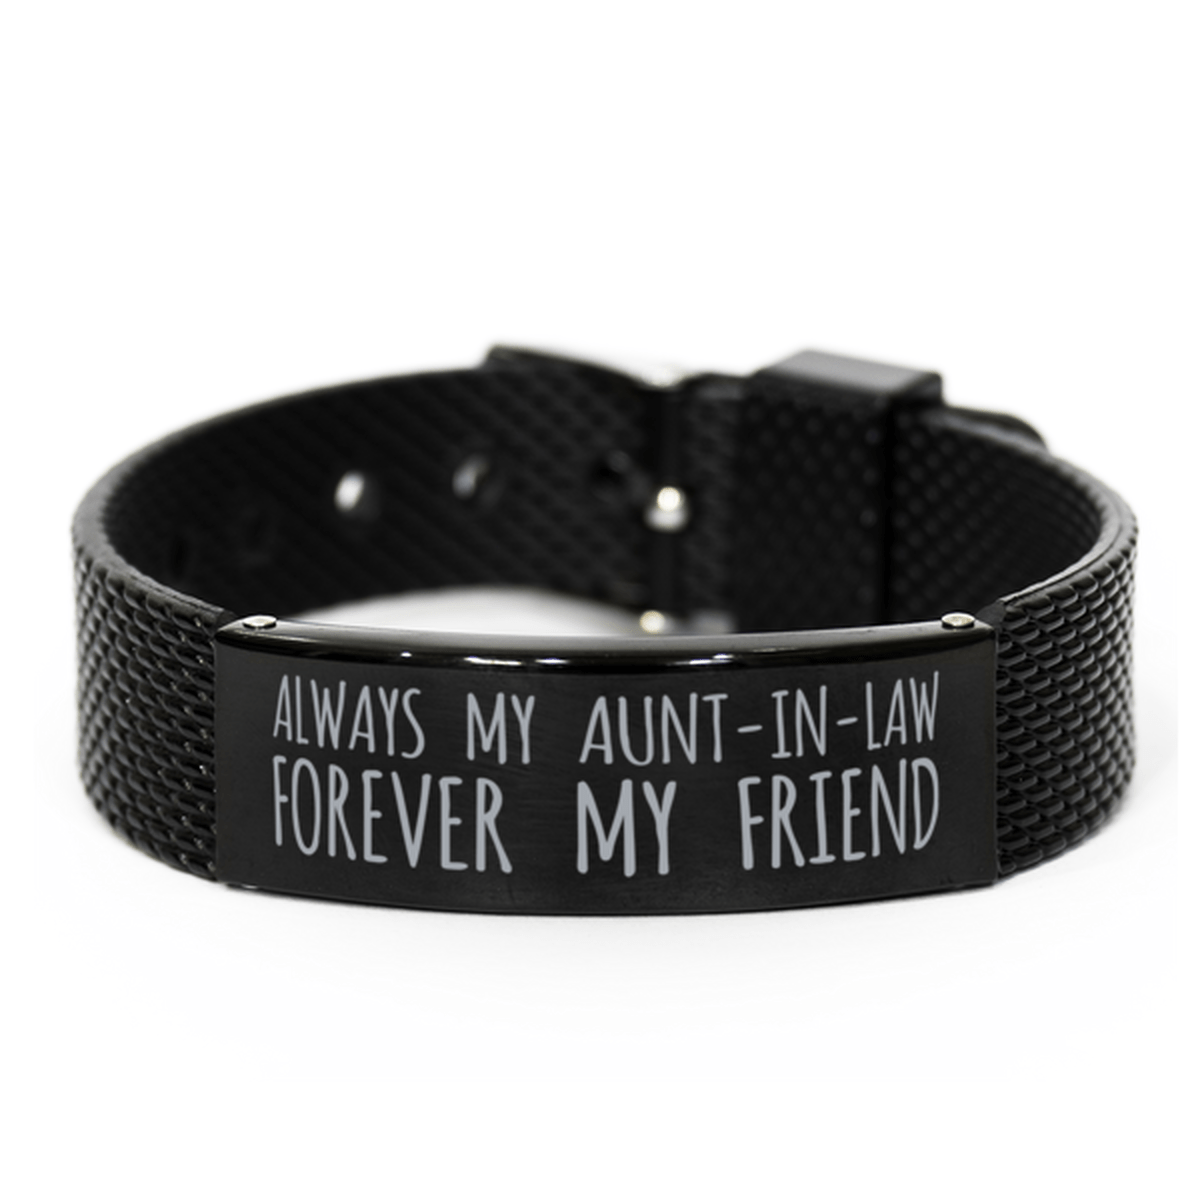 Inspirational Aunt-In-Law Black Shark Mesh Bracelet, Always My Aunt-In-Law Forever My Friend, Best Birthday Gifts for Family Friends